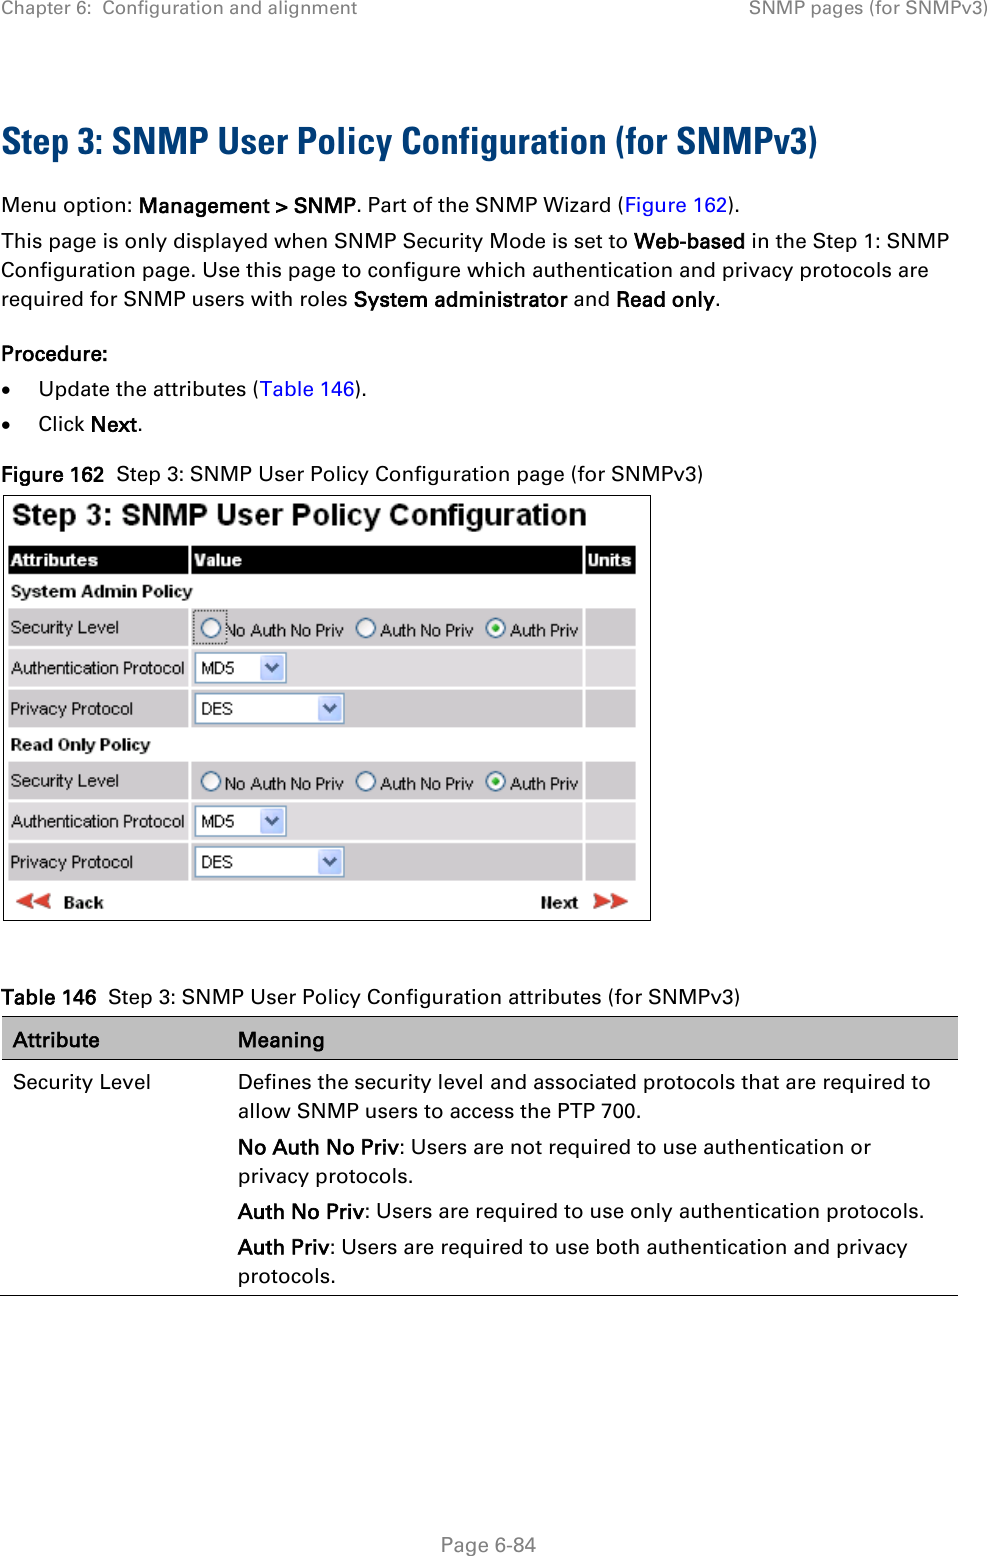 Chapter 6:  Configuration and alignment SNMP pages (for SNMPv3)  Step 3: SNMP User Policy Configuration (for SNMPv3) Menu option: Management &gt; SNMP. Part of the SNMP Wizard (Figure 162). This page is only displayed when SNMP Security Mode is set to Web-based in the Step 1: SNMP Configuration page. Use this page to configure which authentication and privacy protocols are required for SNMP users with roles System administrator and Read only. Procedure: • Update the attributes (Table 146). • Click Next. Figure 162  Step 3: SNMP User Policy Configuration page (for SNMPv3)   Table 146  Step 3: SNMP User Policy Configuration attributes (for SNMPv3) Attribute Meaning Security Level Defines the security level and associated protocols that are required to allow SNMP users to access the PTP 700. No Auth No Priv: Users are not required to use authentication or privacy protocols. Auth No Priv: Users are required to use only authentication protocols. Auth Priv: Users are required to use both authentication and privacy protocols.  Page 6-84 